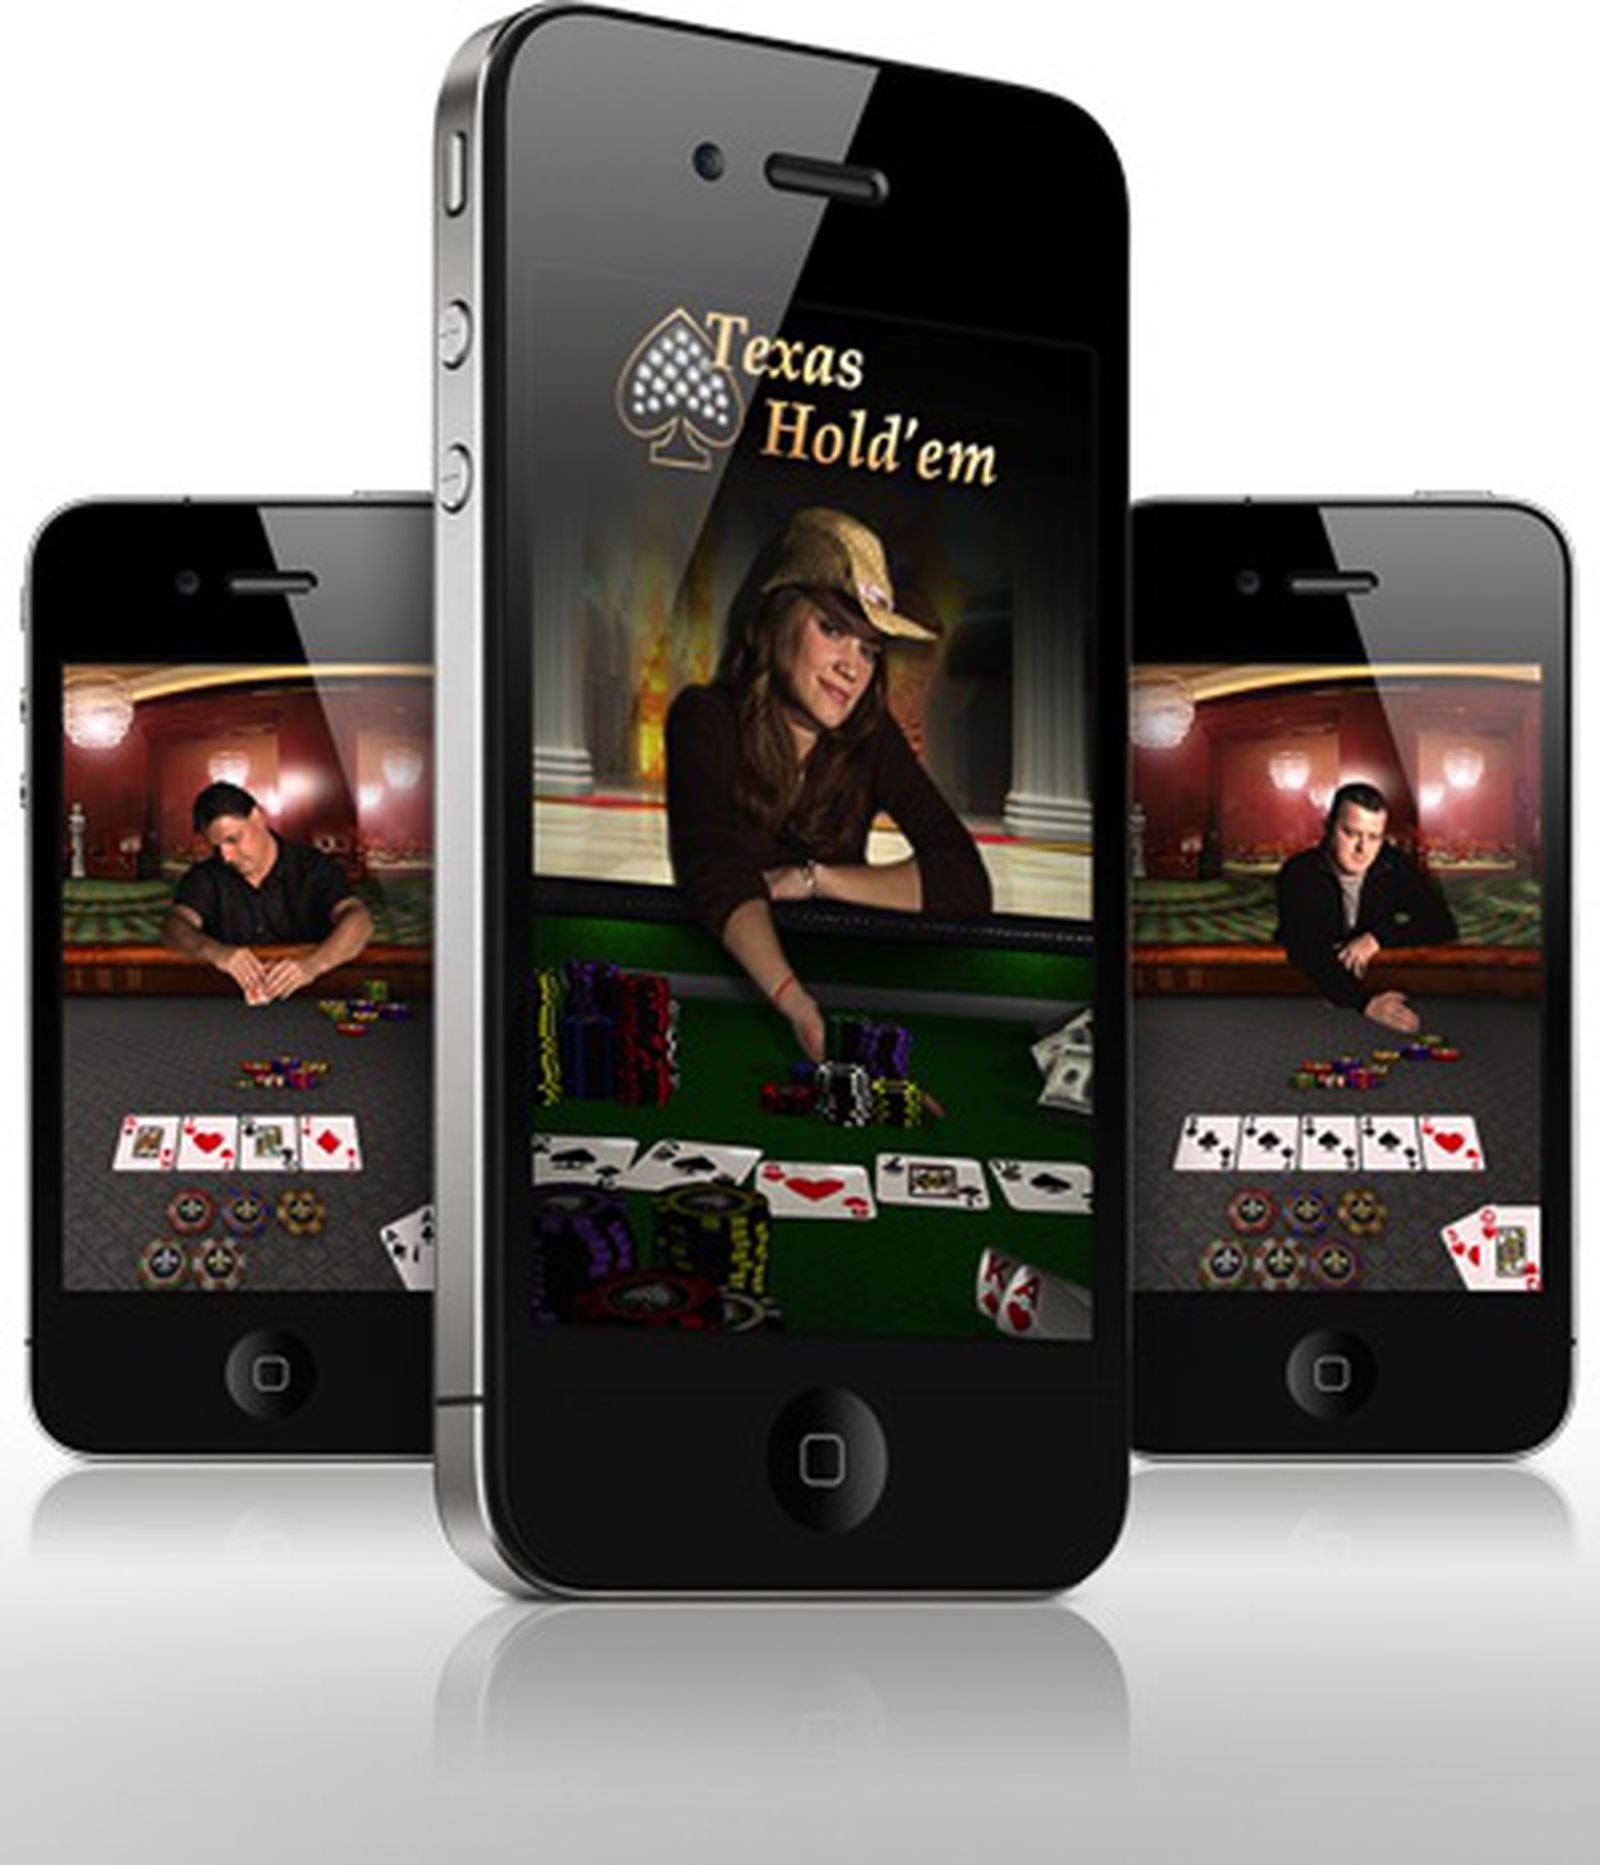 Texas holdem poker iphone download